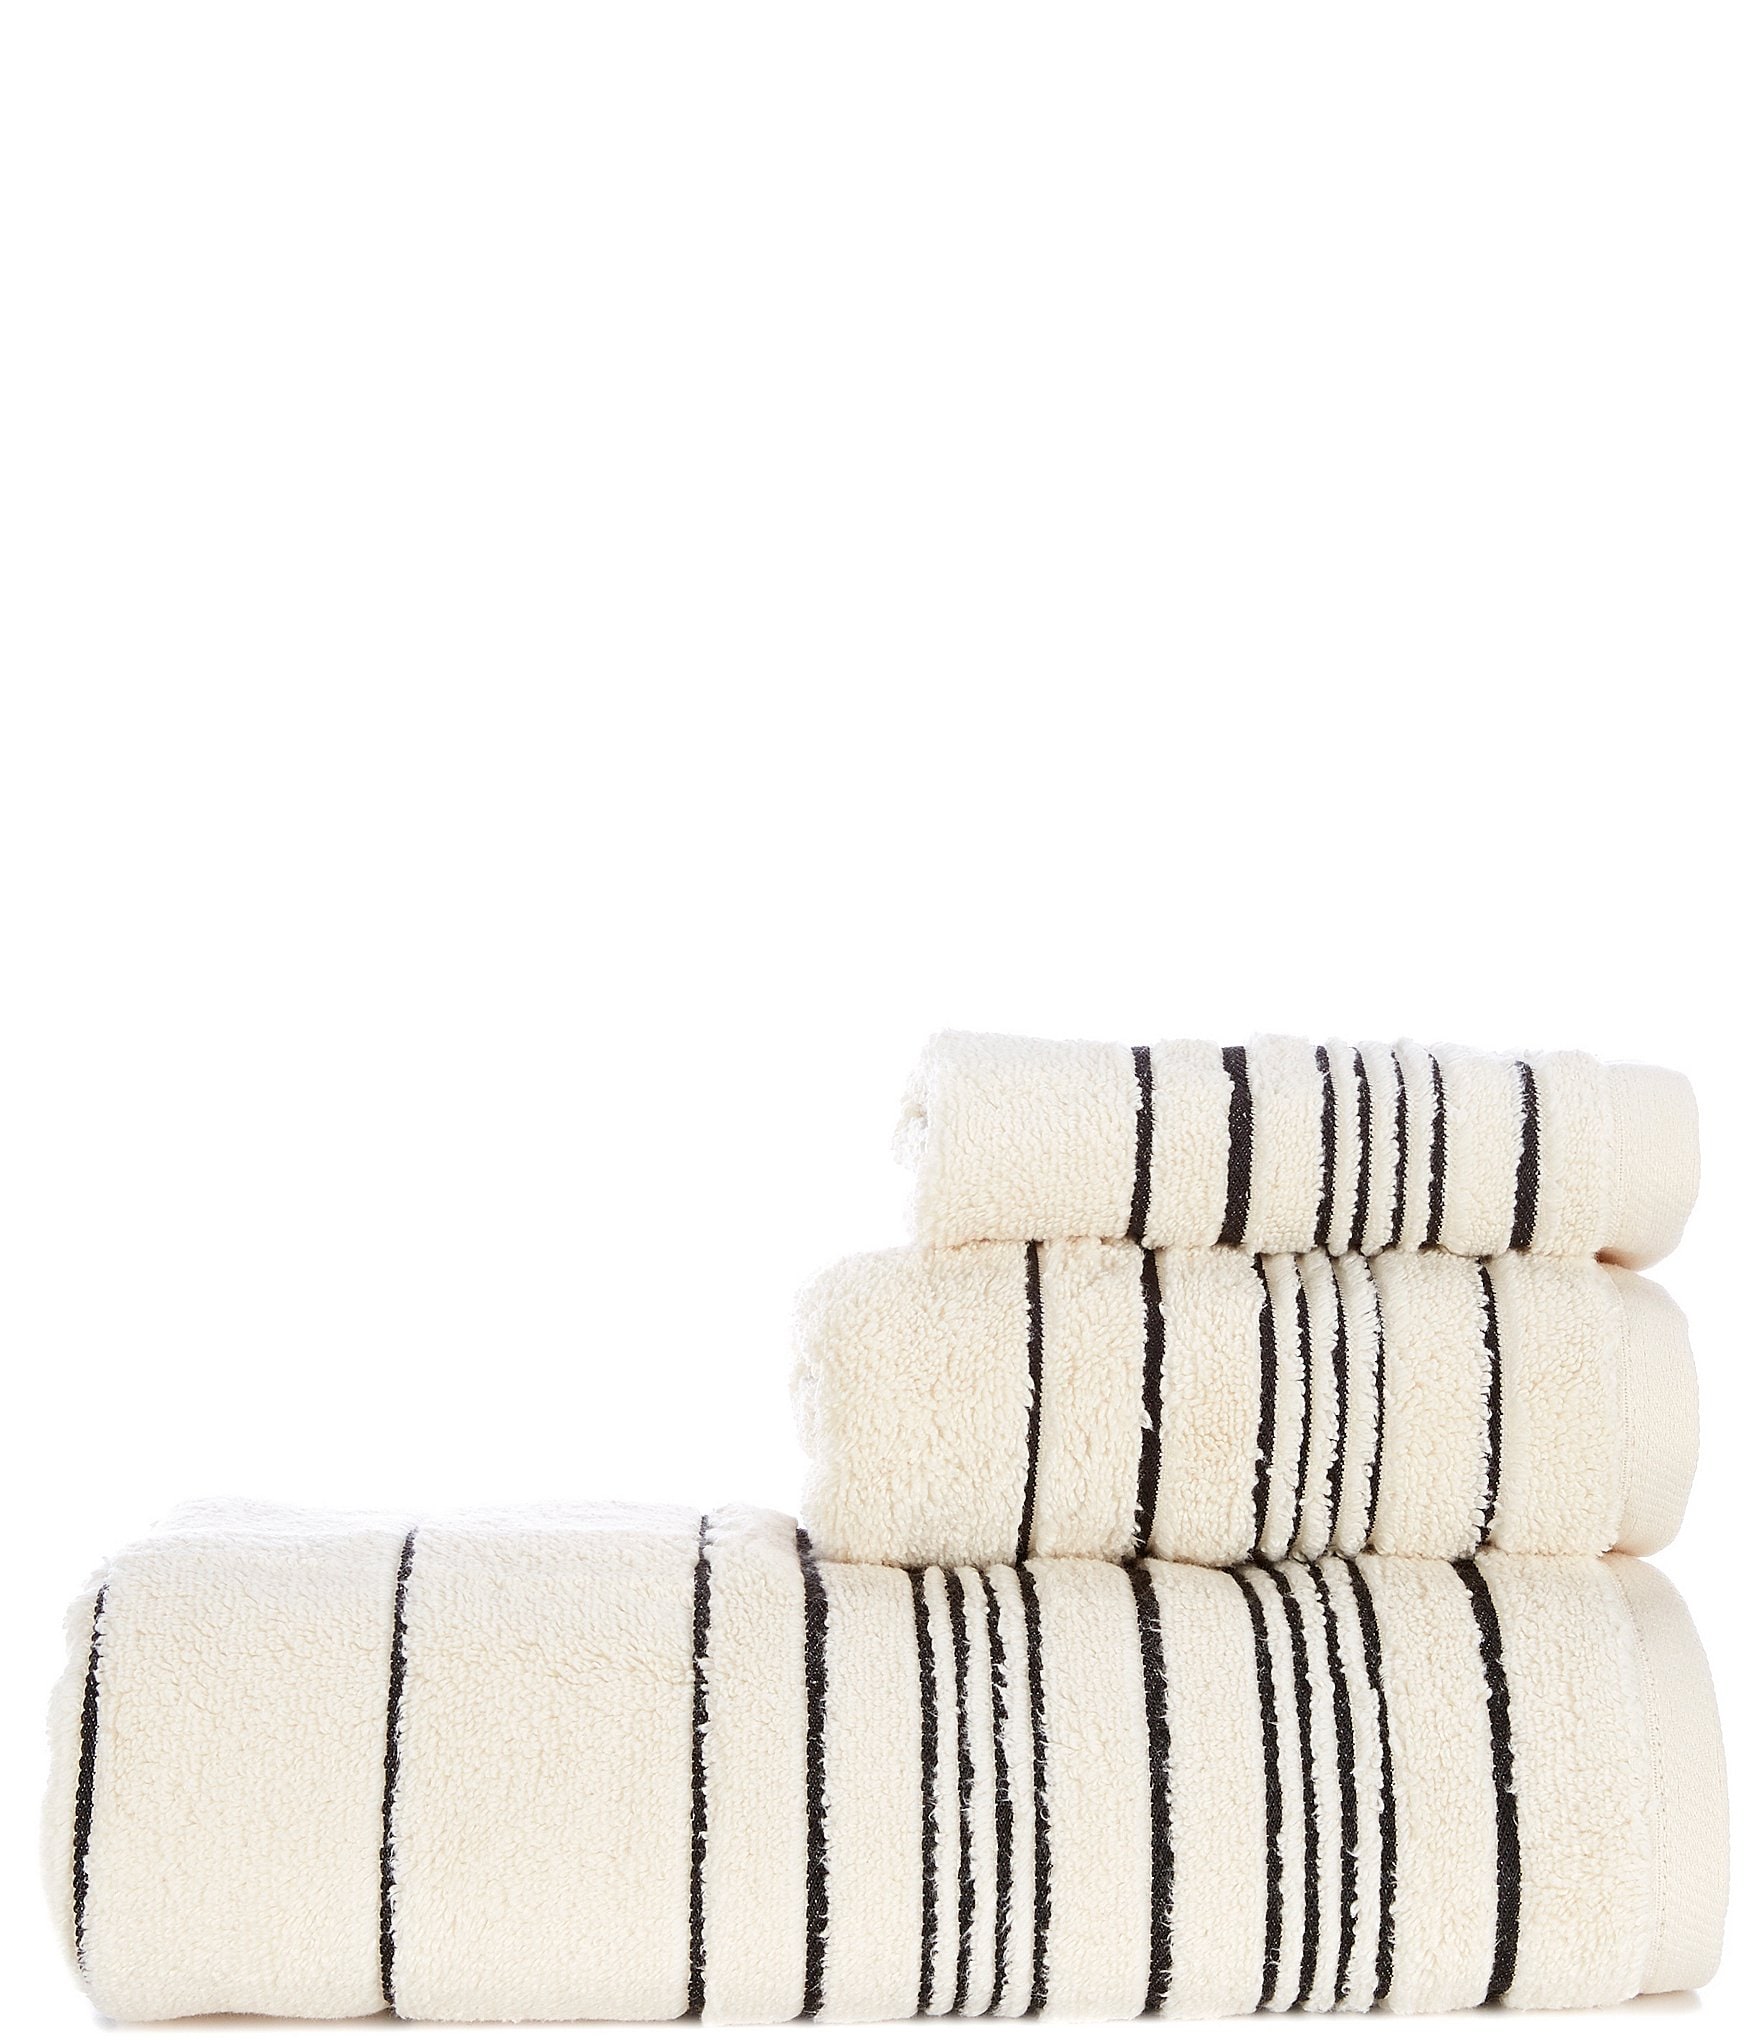 Southern Living Striped Dish Cloths, Set of 4